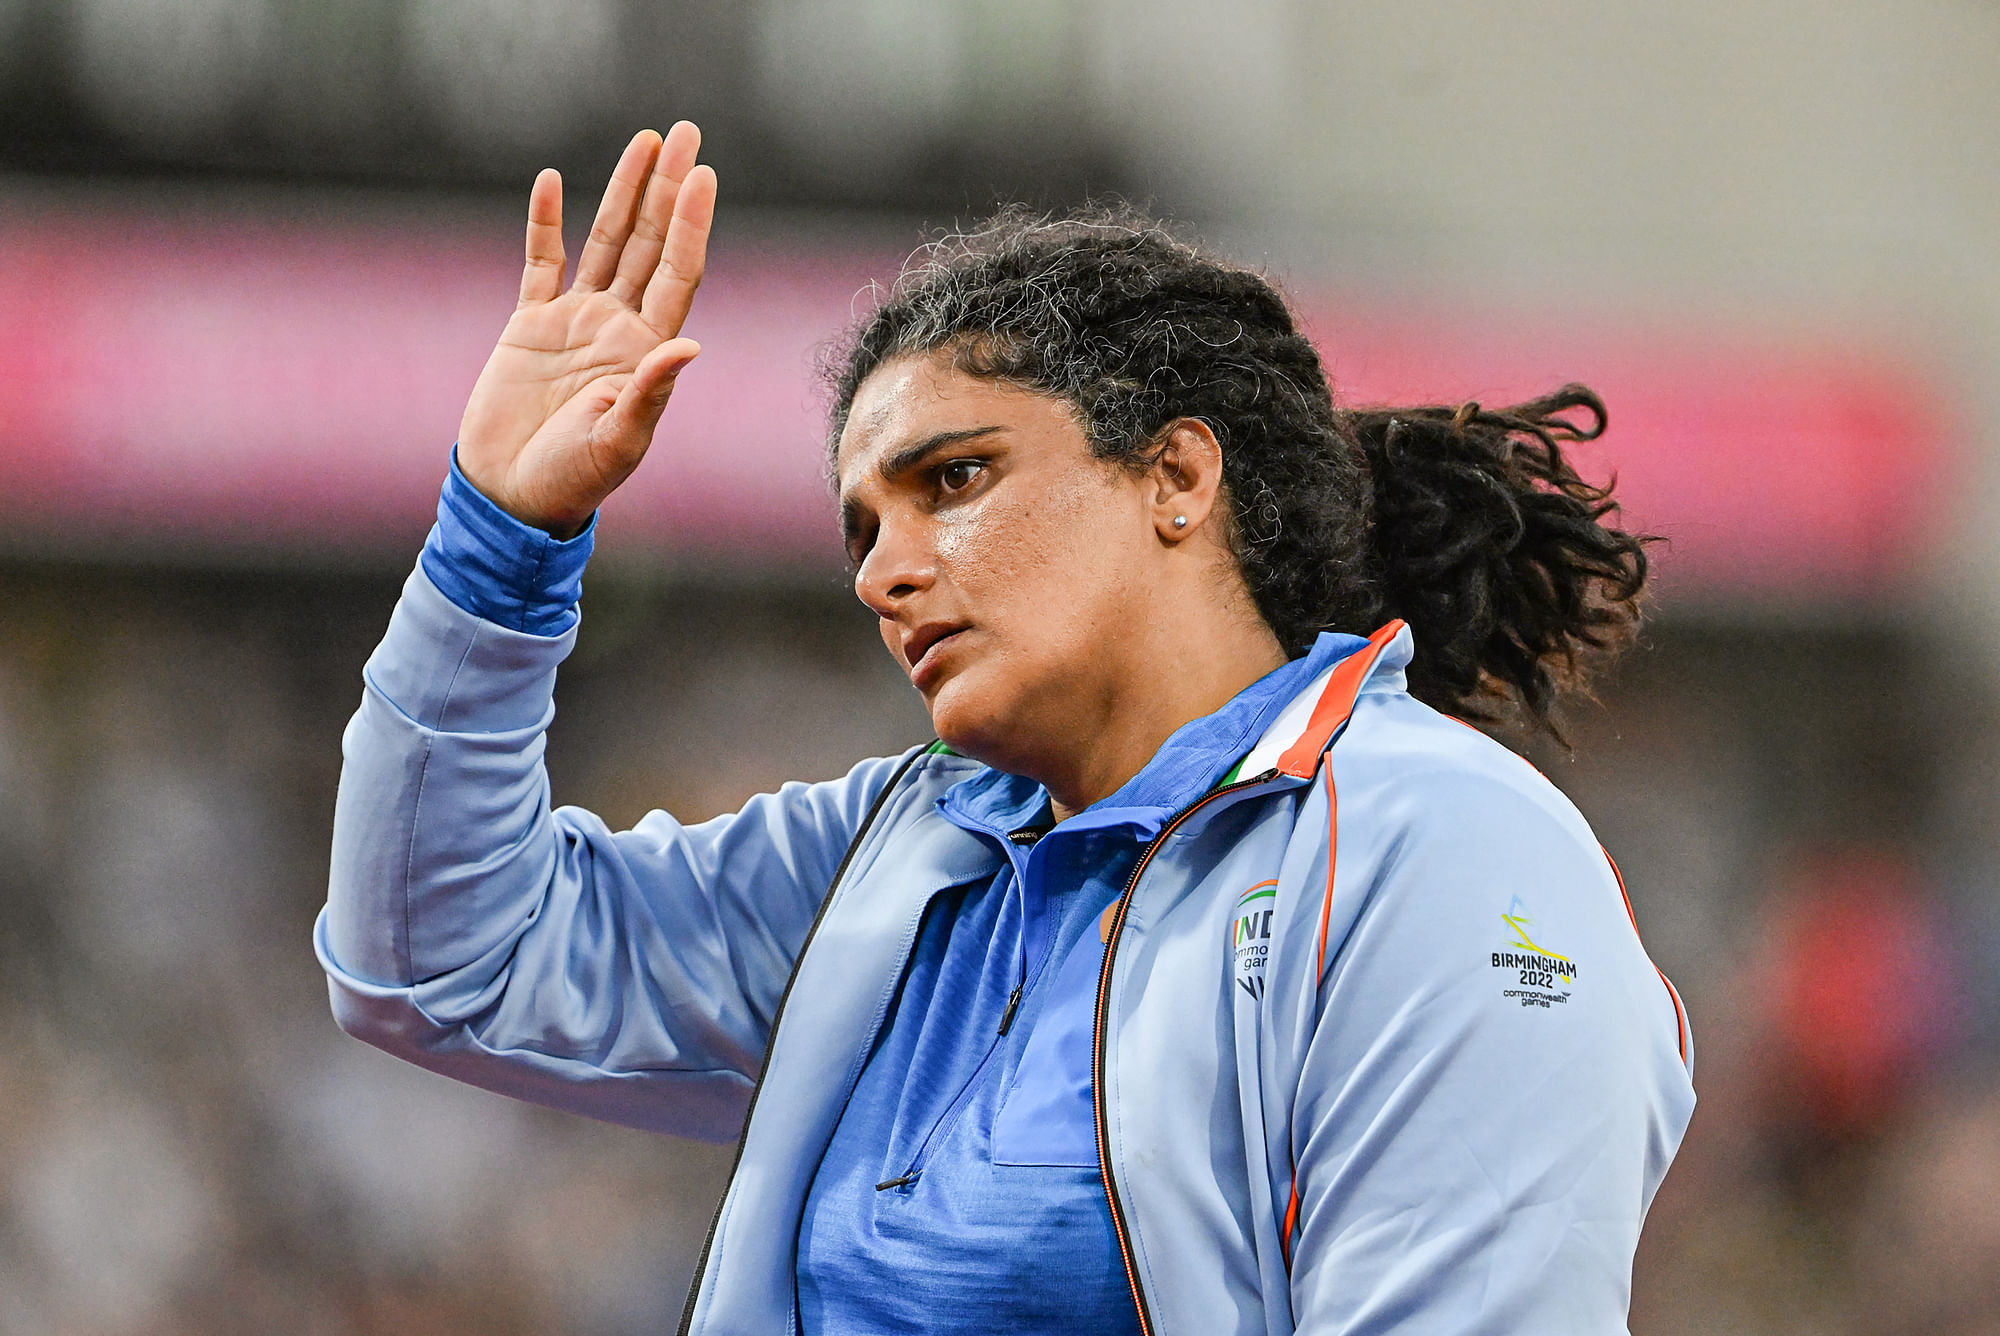 Commonwealth Games 2022, Day 5 Live Score and Results Updates India Have Won Medals in Lawn Bowls, TT and Weightlifting